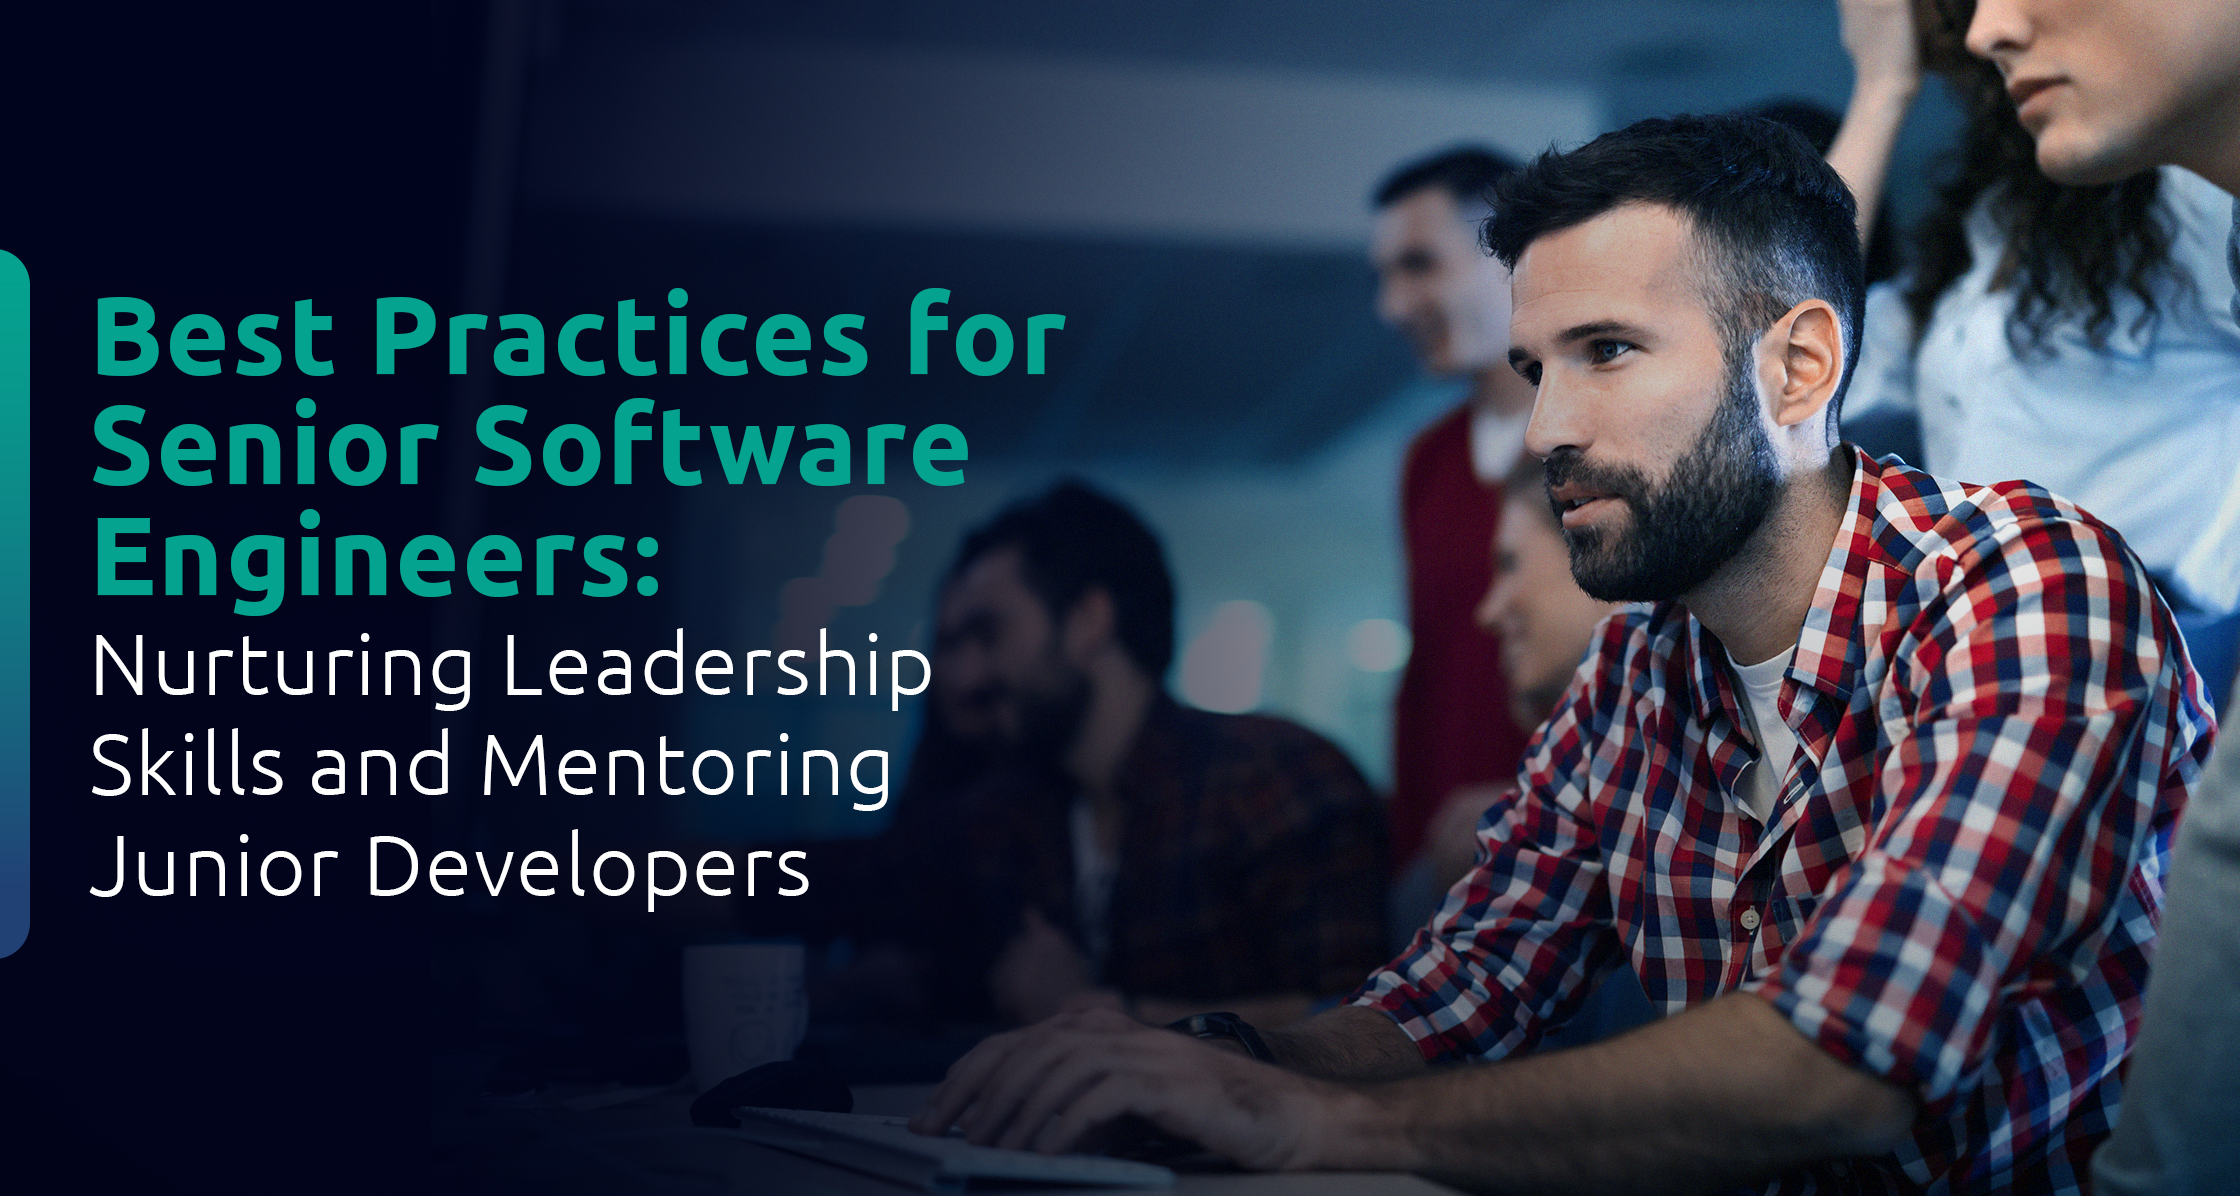 Best practices for senior software engineers